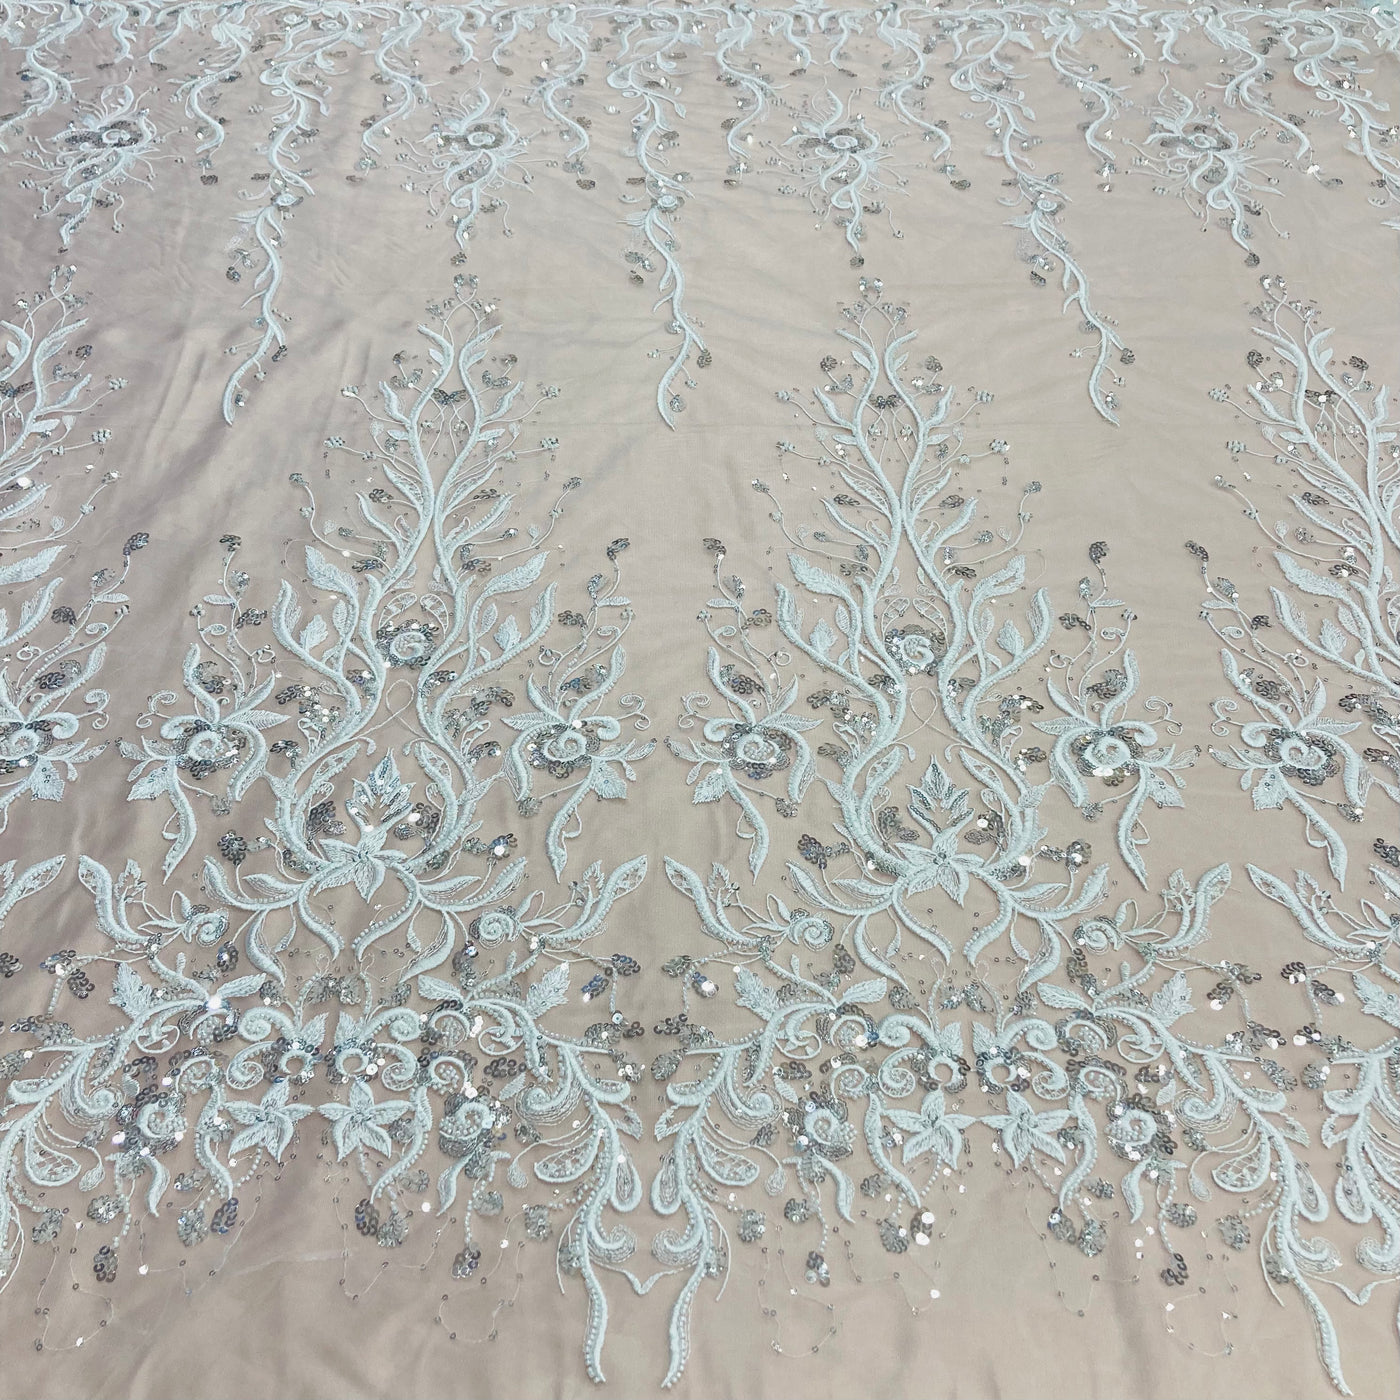 Beaded Lace Fabric Embroidered on 100% Polyester Net Mesh | Lace USA - GD-217120